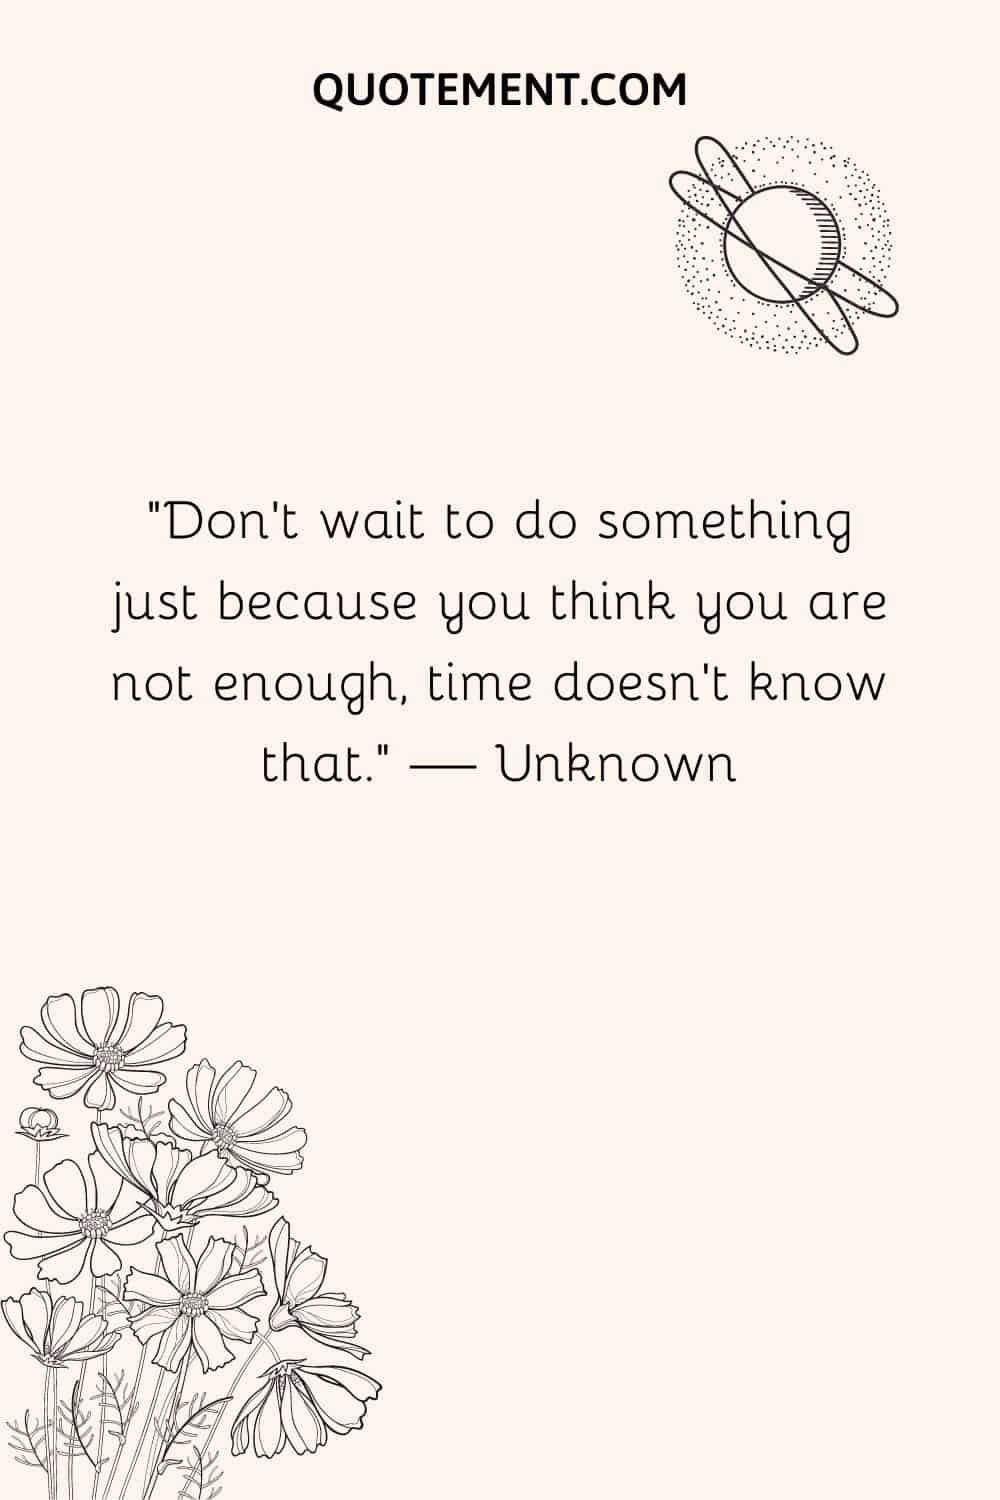 Don’t wait to do something just because you think you are not enough, time doesn’t know that